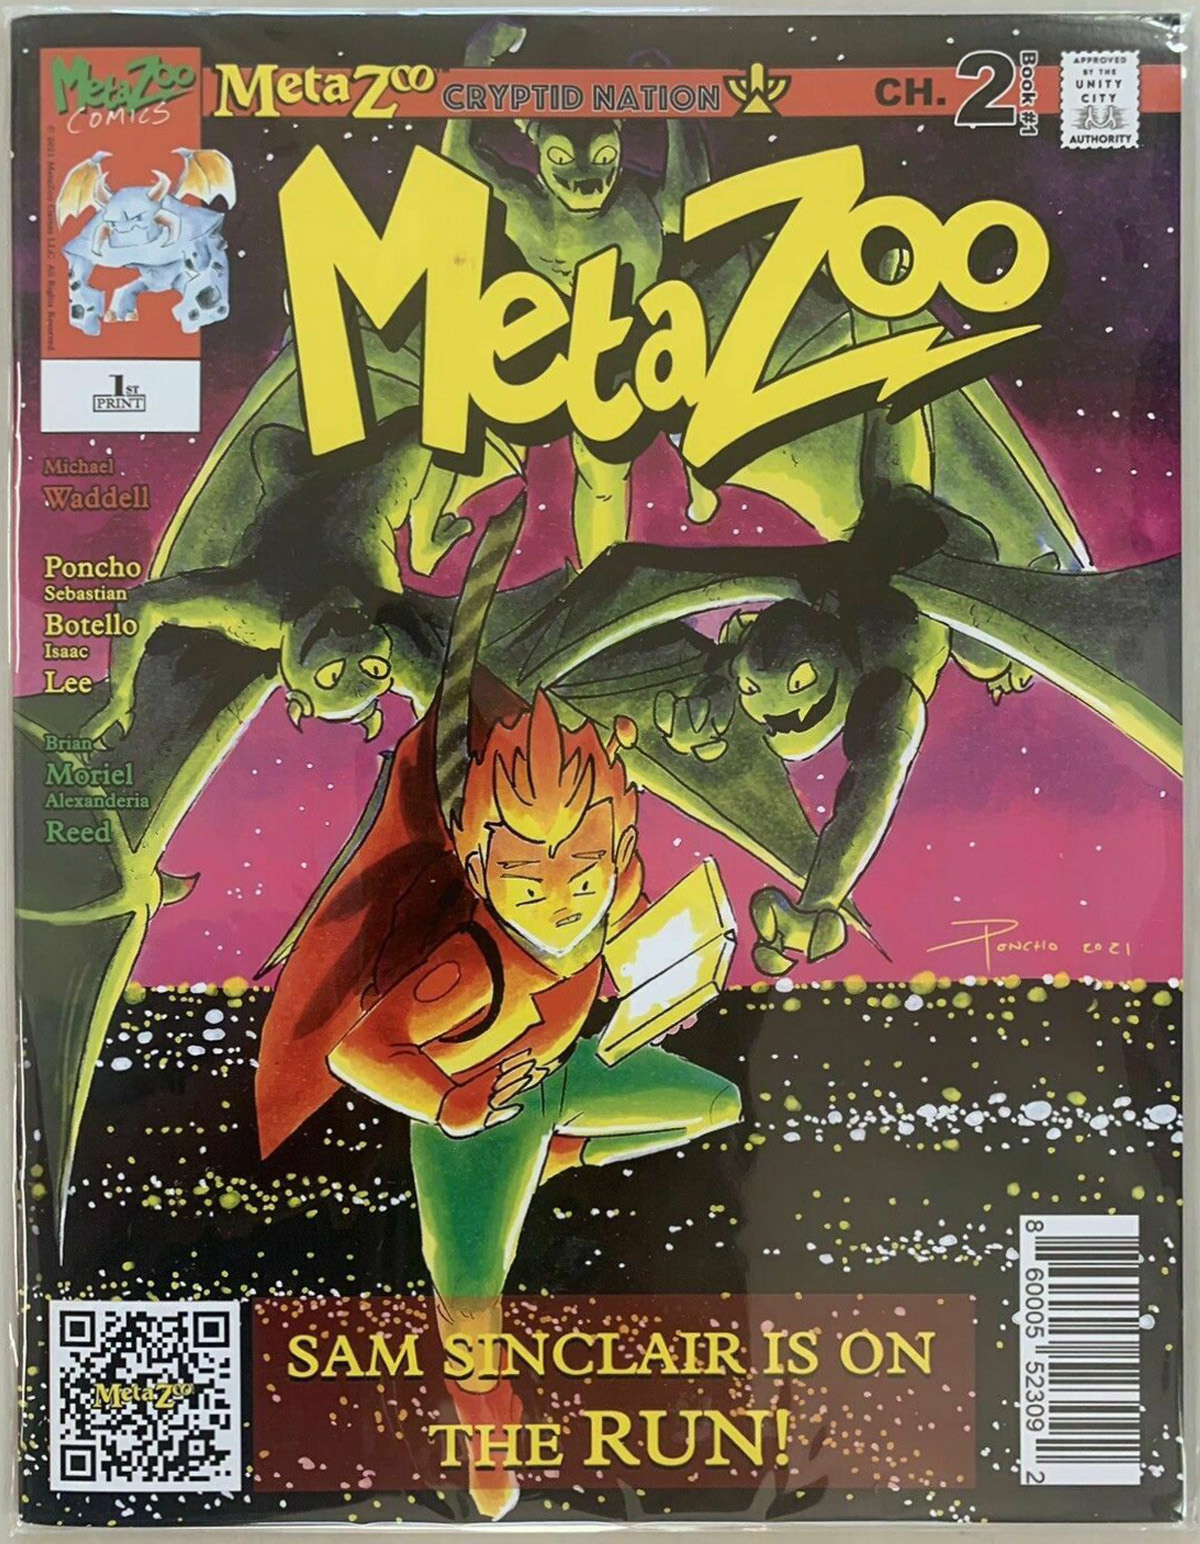 MetaZoo Illustrated Novel - Chapter 2 Print 1 - Front